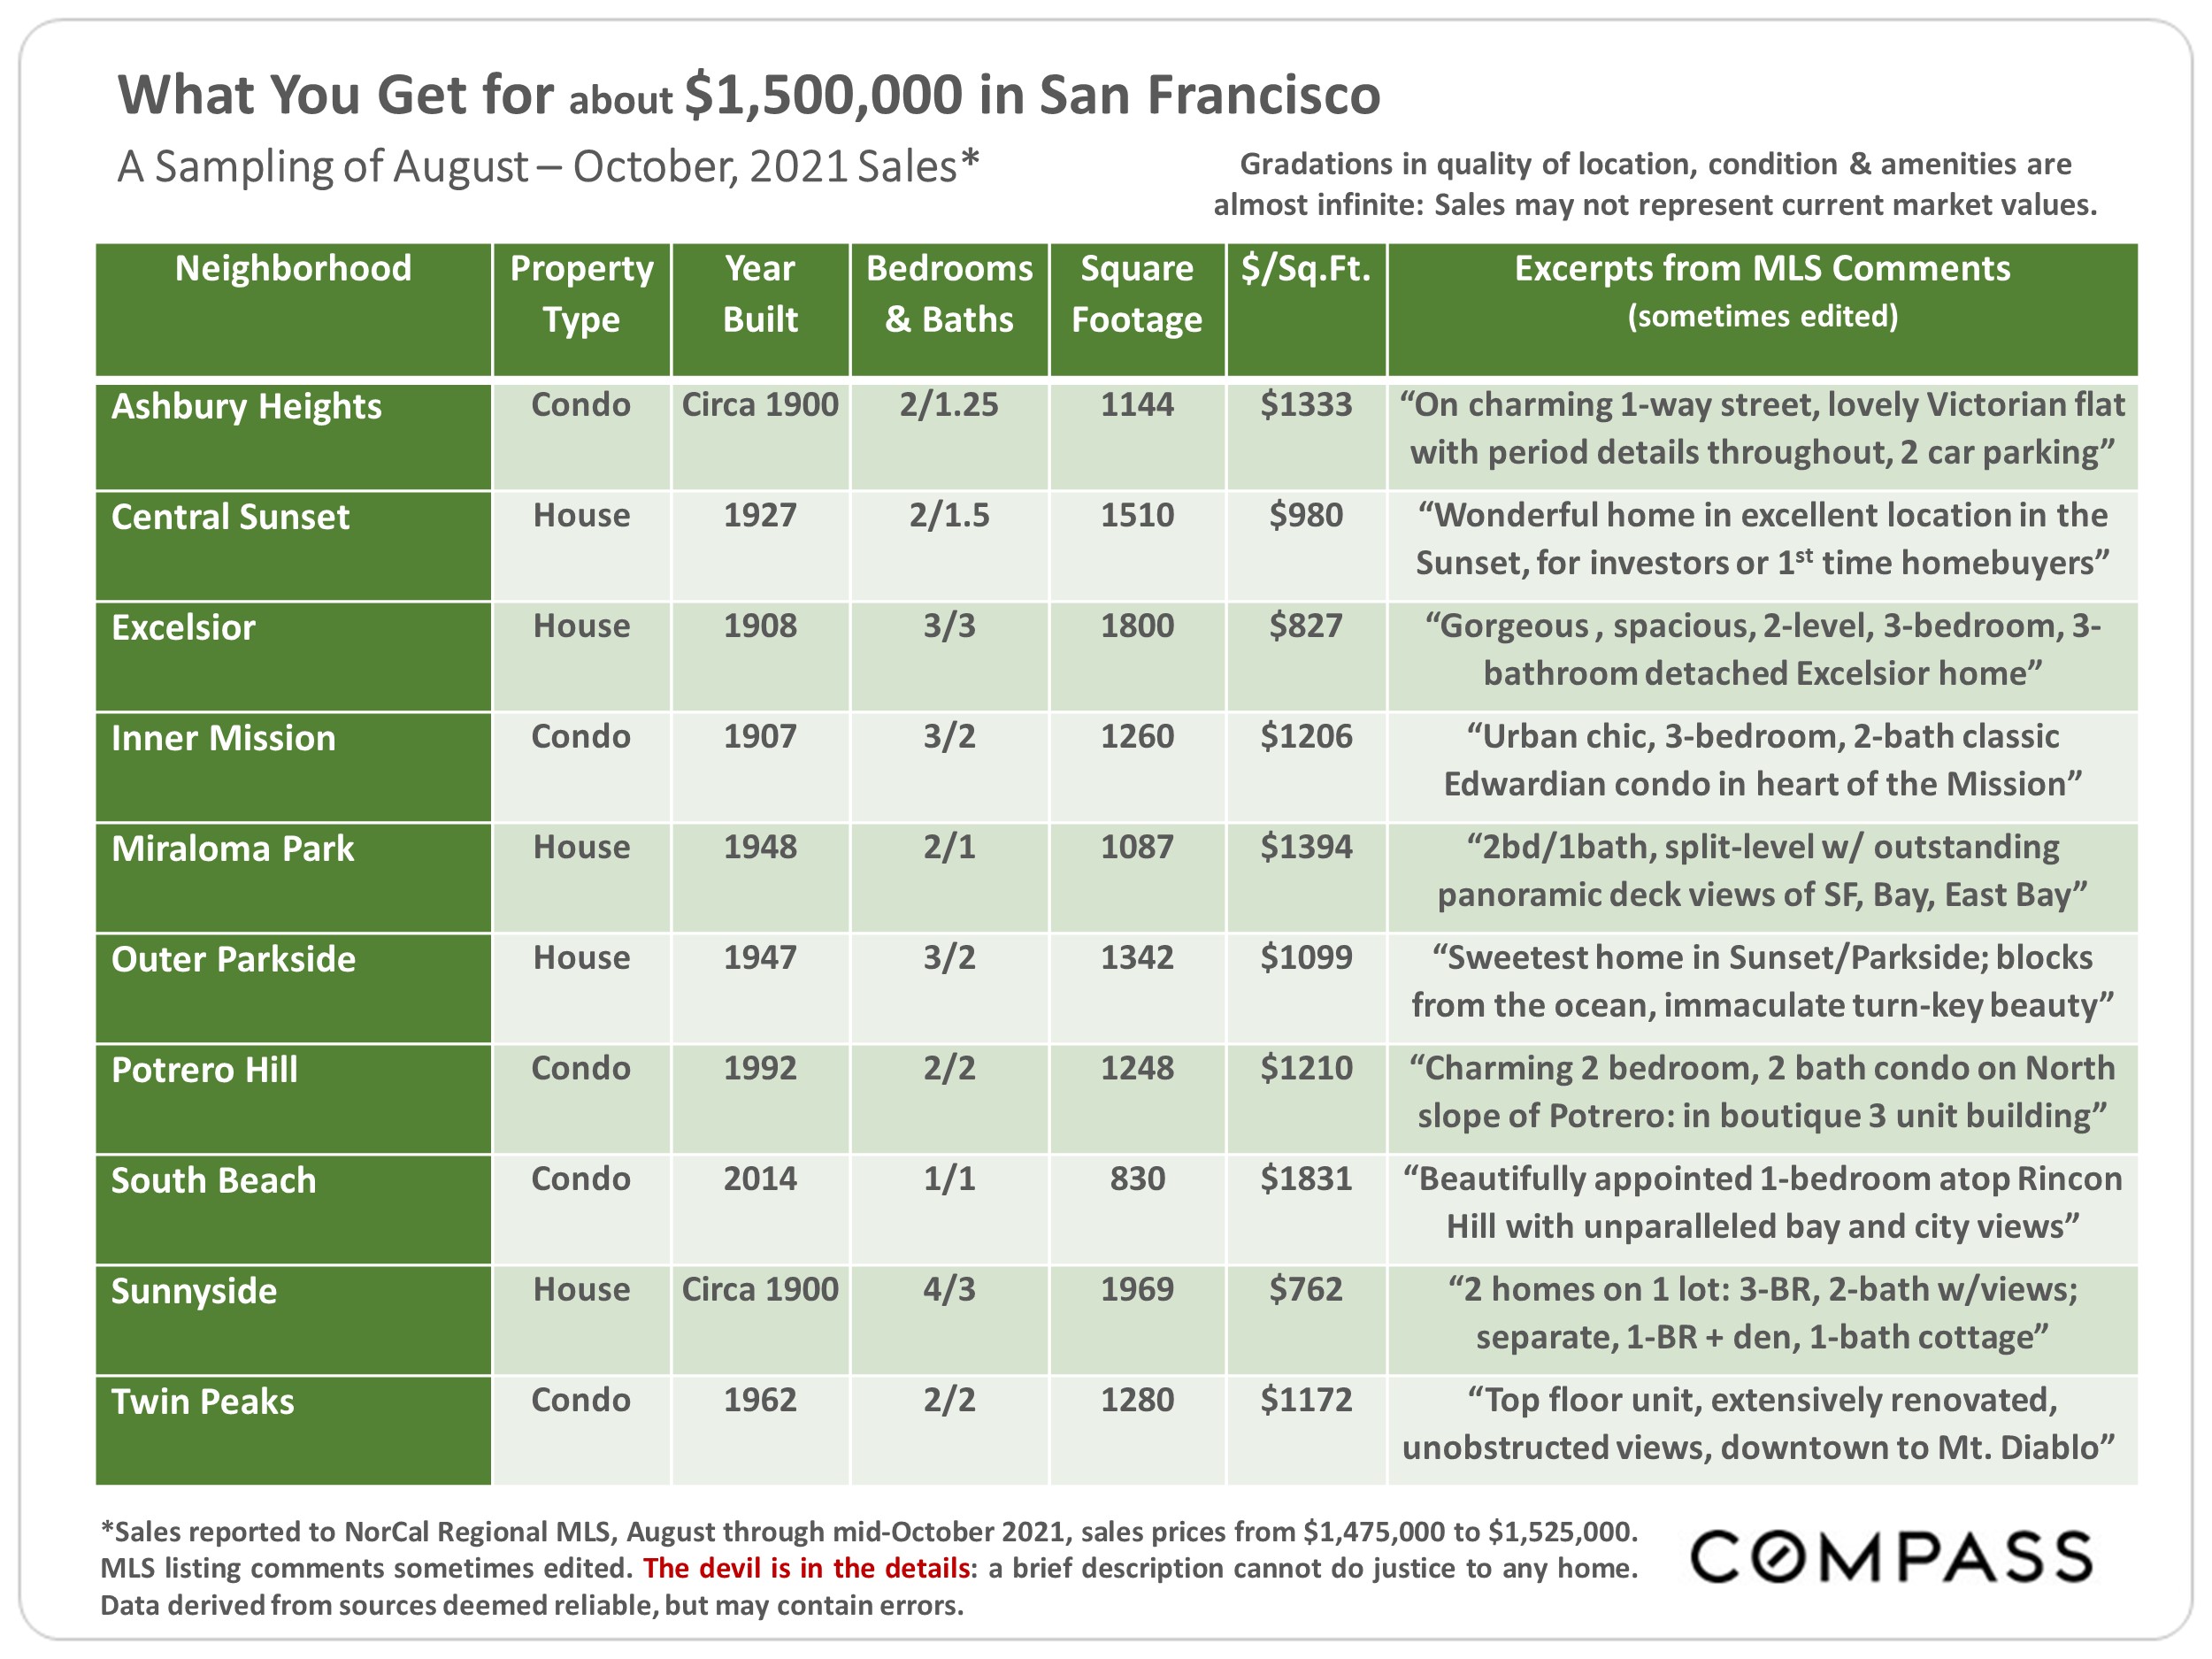 table showing what you get for $1.5M in neighborhoods of San Francisco